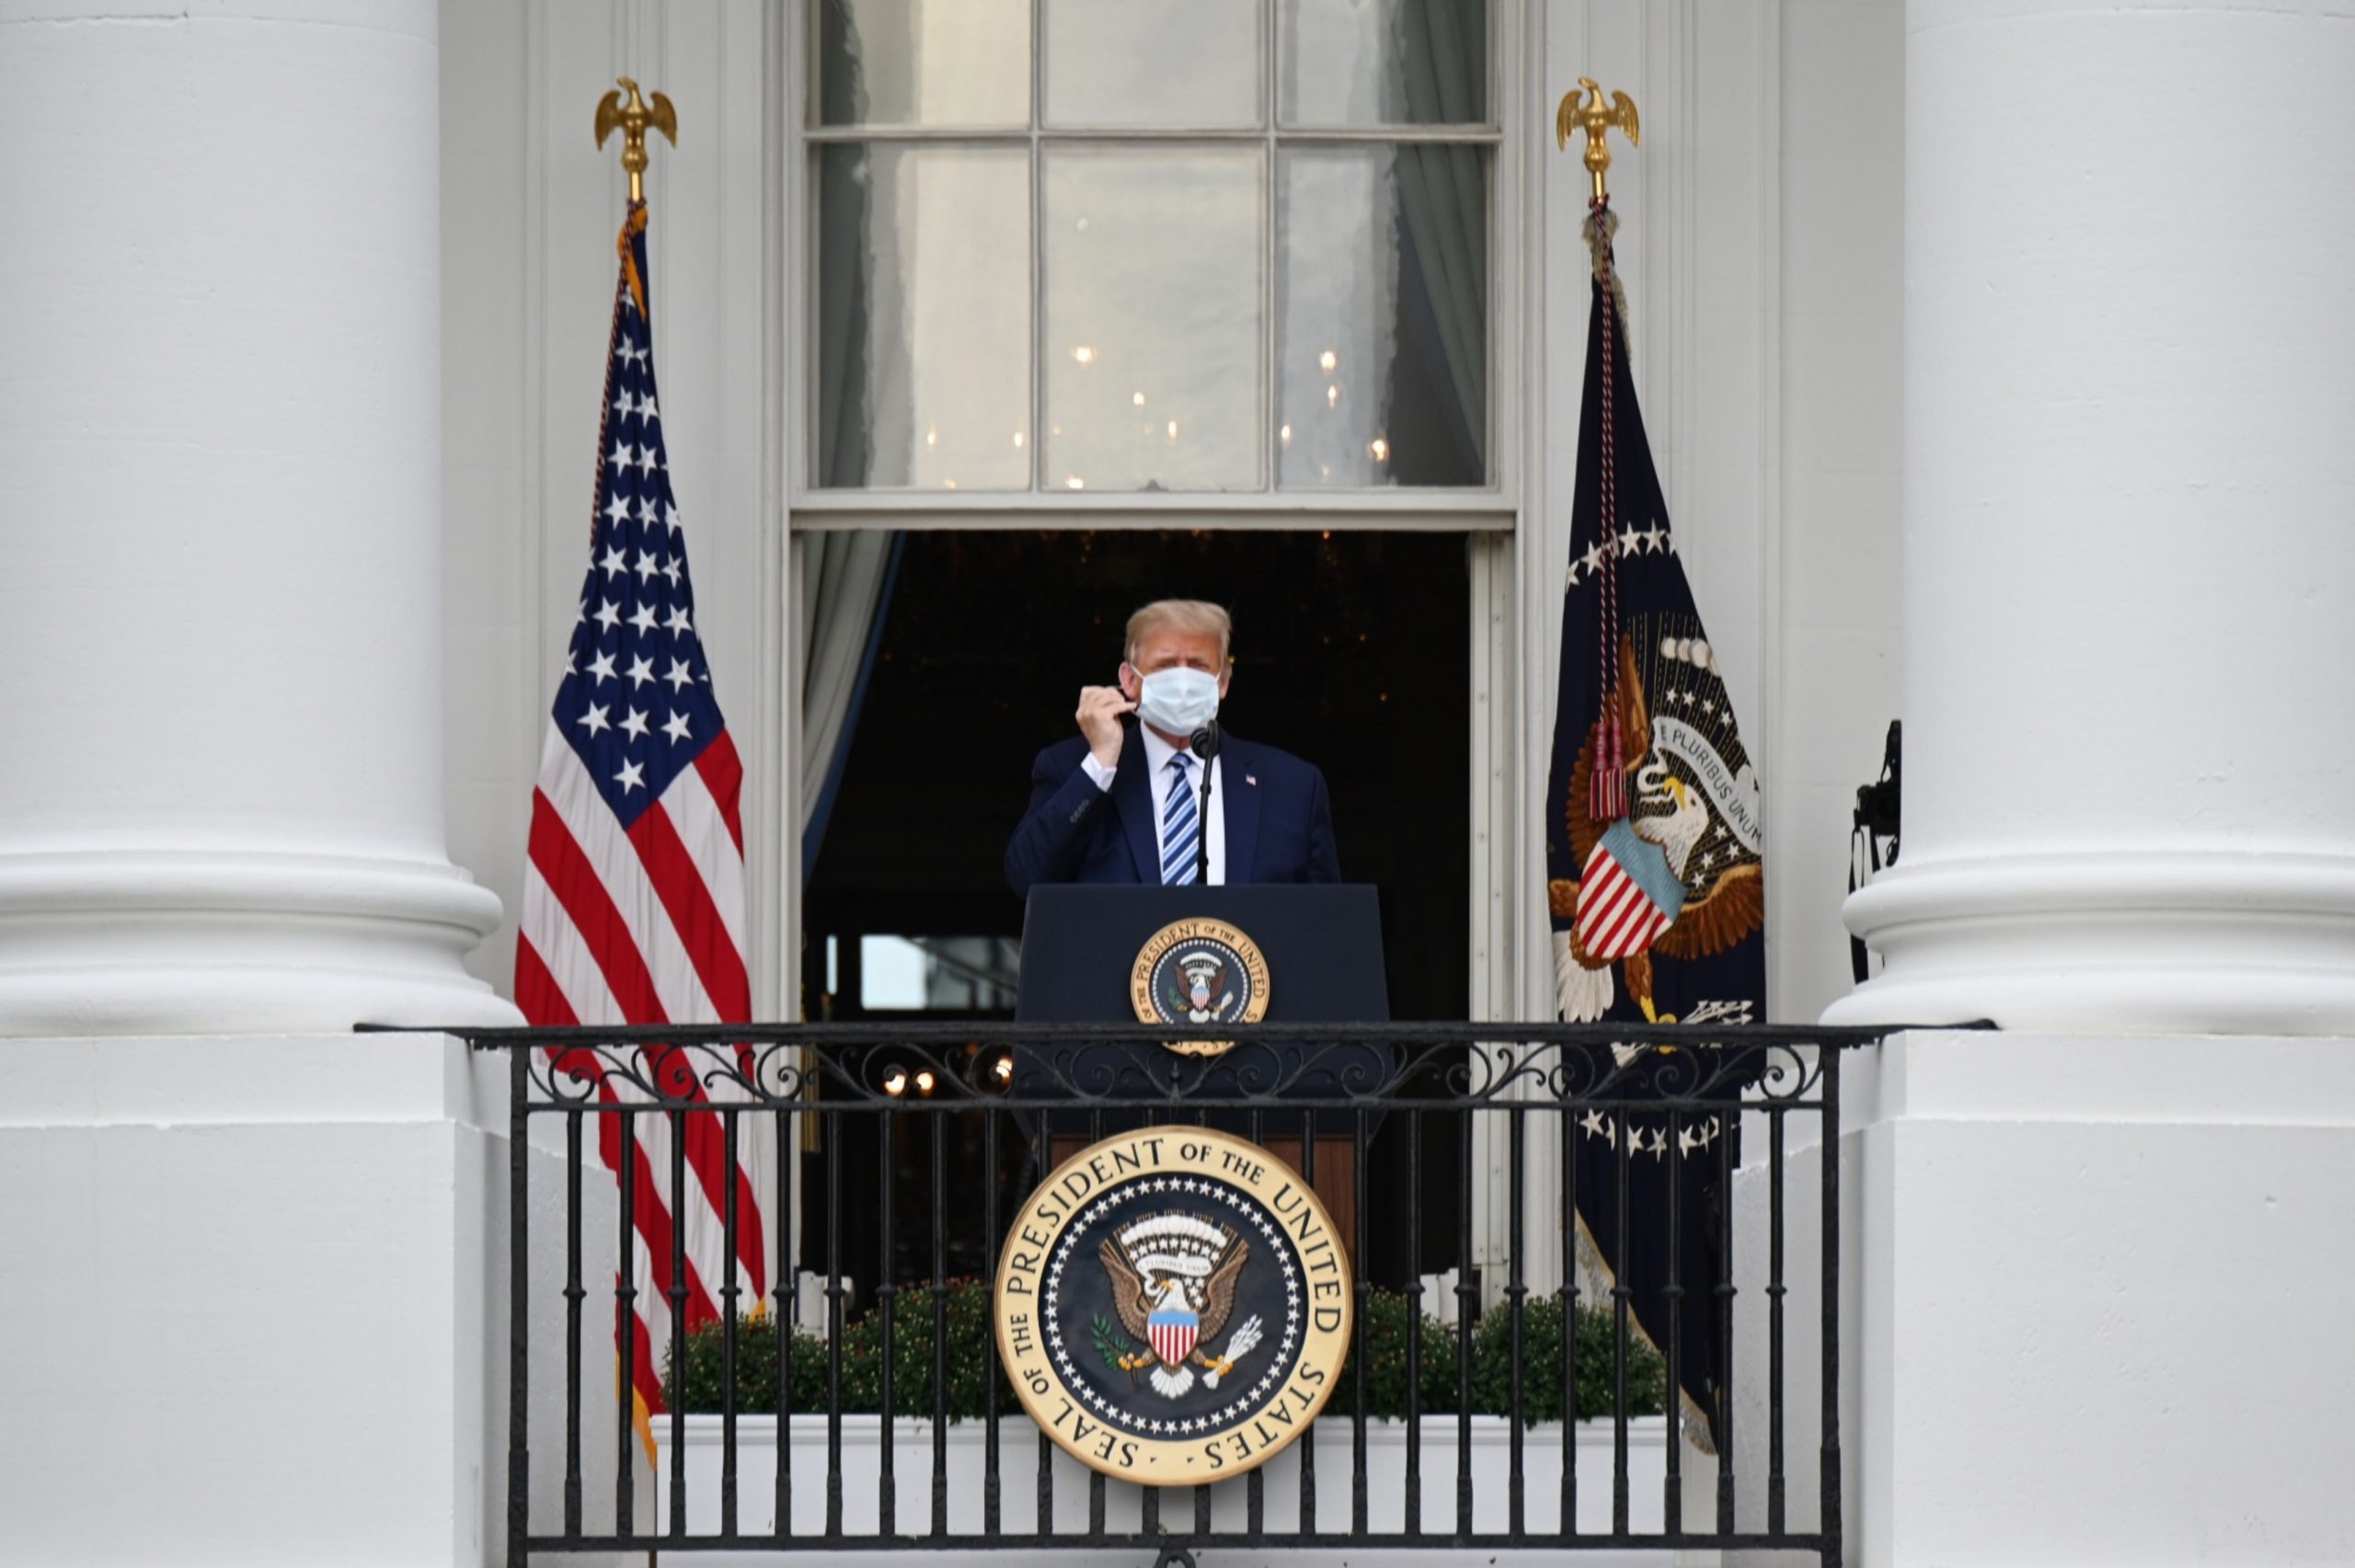 epa08734758 US President Donald J. Trump removes a protective mask ahead of speaking from the Truman Balcony of the White House in Washington, DC, USA, on 10 October 2020. Trump, making his first public appearance since returning from a three-day hospitalization for Covid-19, is setting the stage for a return to the campaign trail even as questions remain about whether he's still contagious.  EPA/Erin Scott / POOL